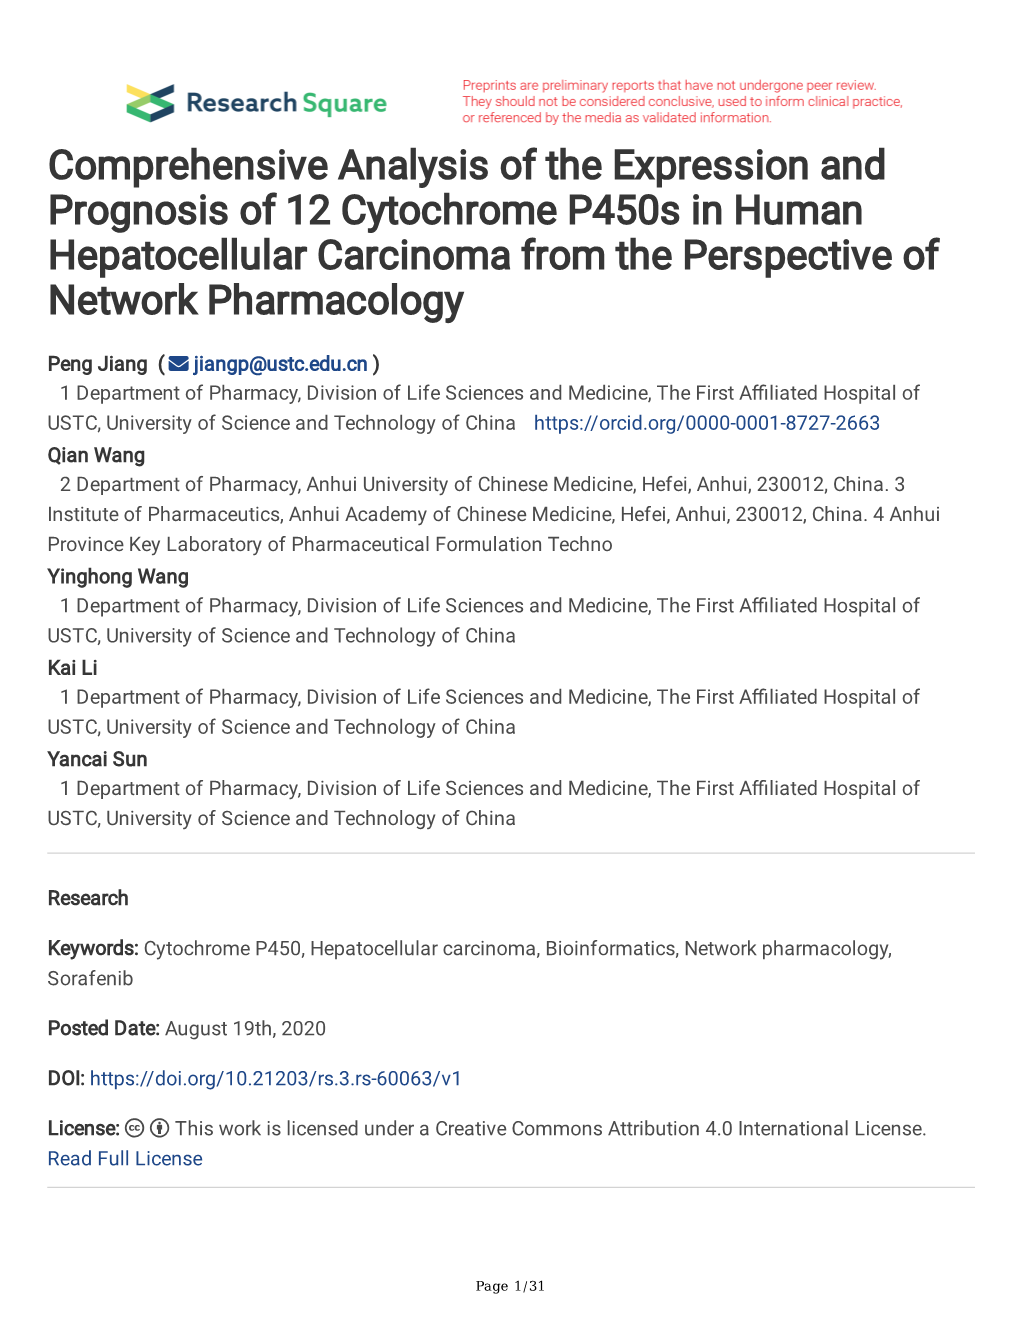 Comprehensive Analysis of the Expression and Prognosis of 12 Cytochrome P450s in Human Hepatocellular Carcinoma from the Perspective of Network Pharmacology